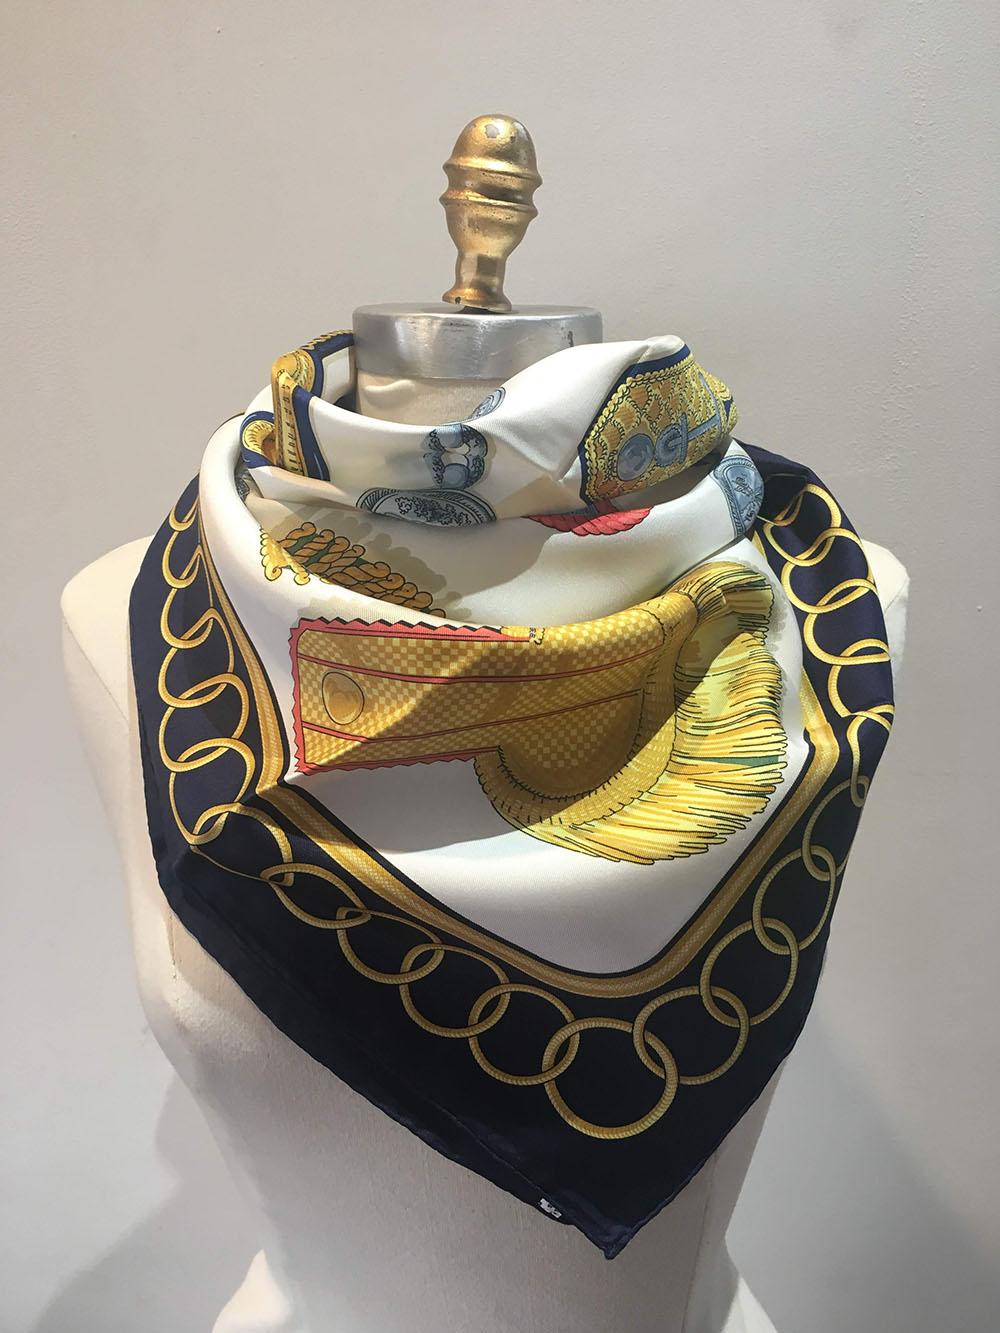 RARE Hermes Vintage Epaulettes silk Scarf c1970s in black in excellent condition. Original silk screen design c1975 by Caty Latham features 16 differently designed classic epaulettes in golds, greys, reds, and blues over a white background and